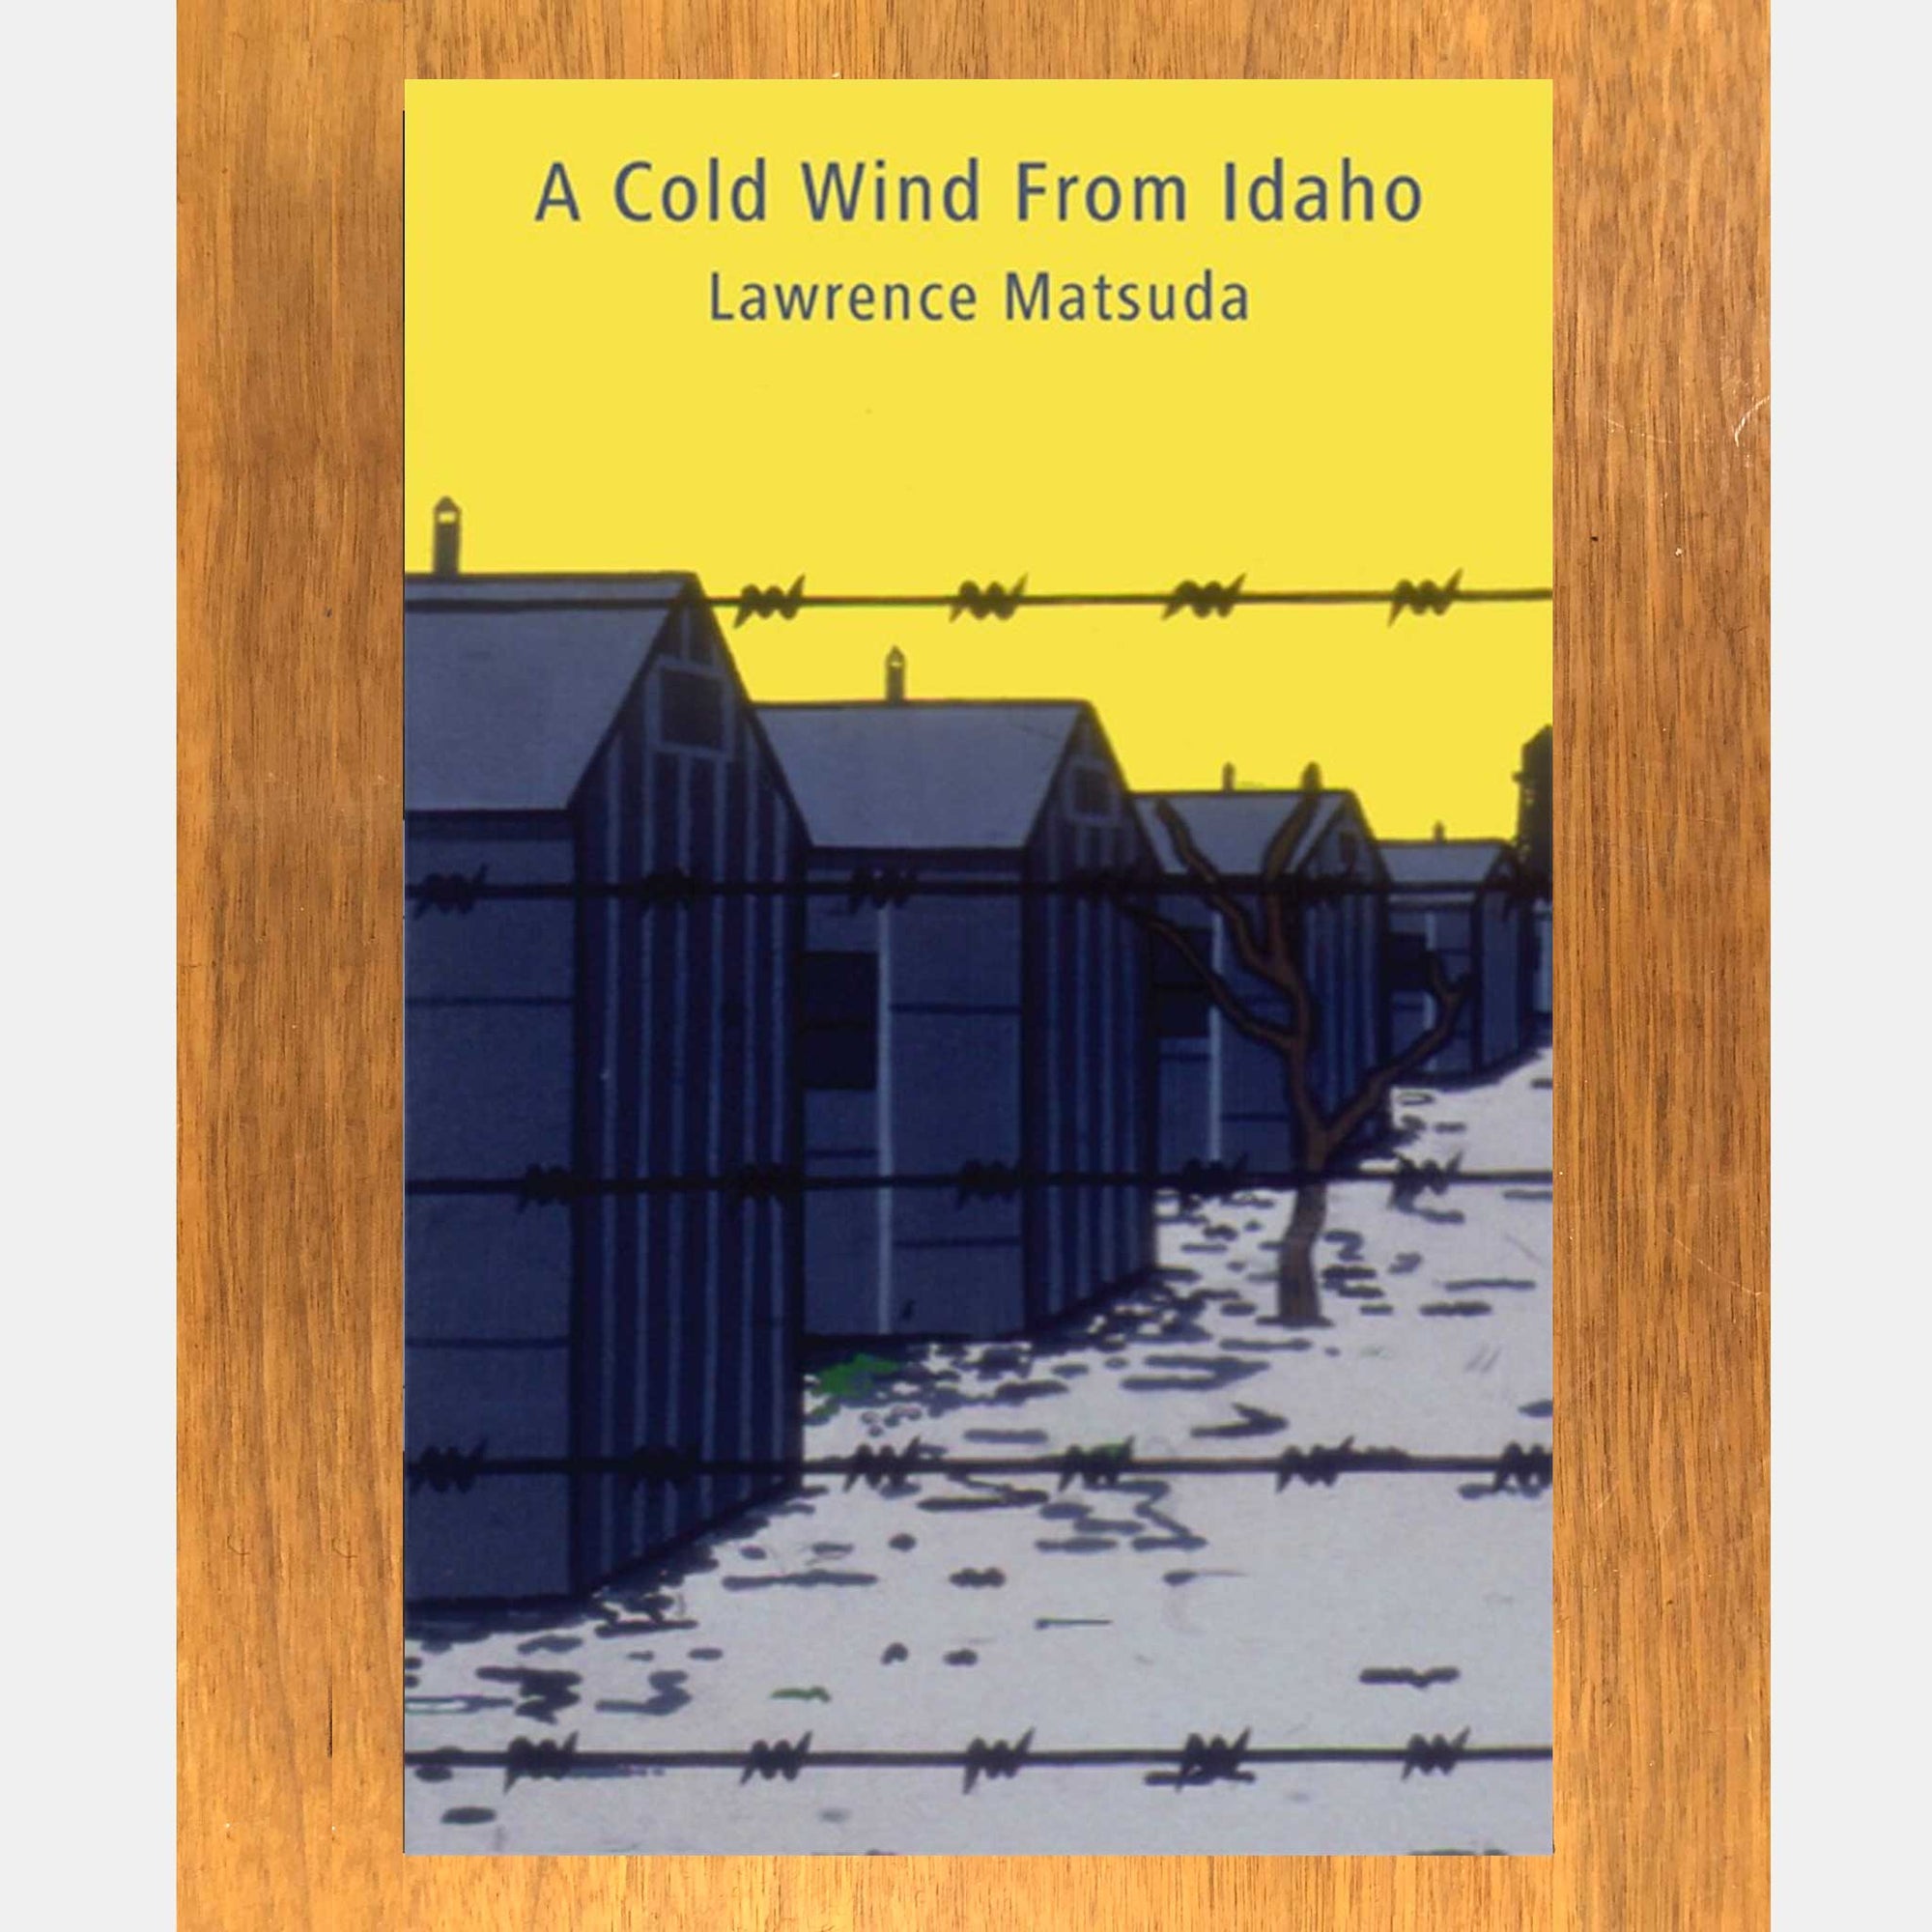 Book: A Cold Wind From Idaho